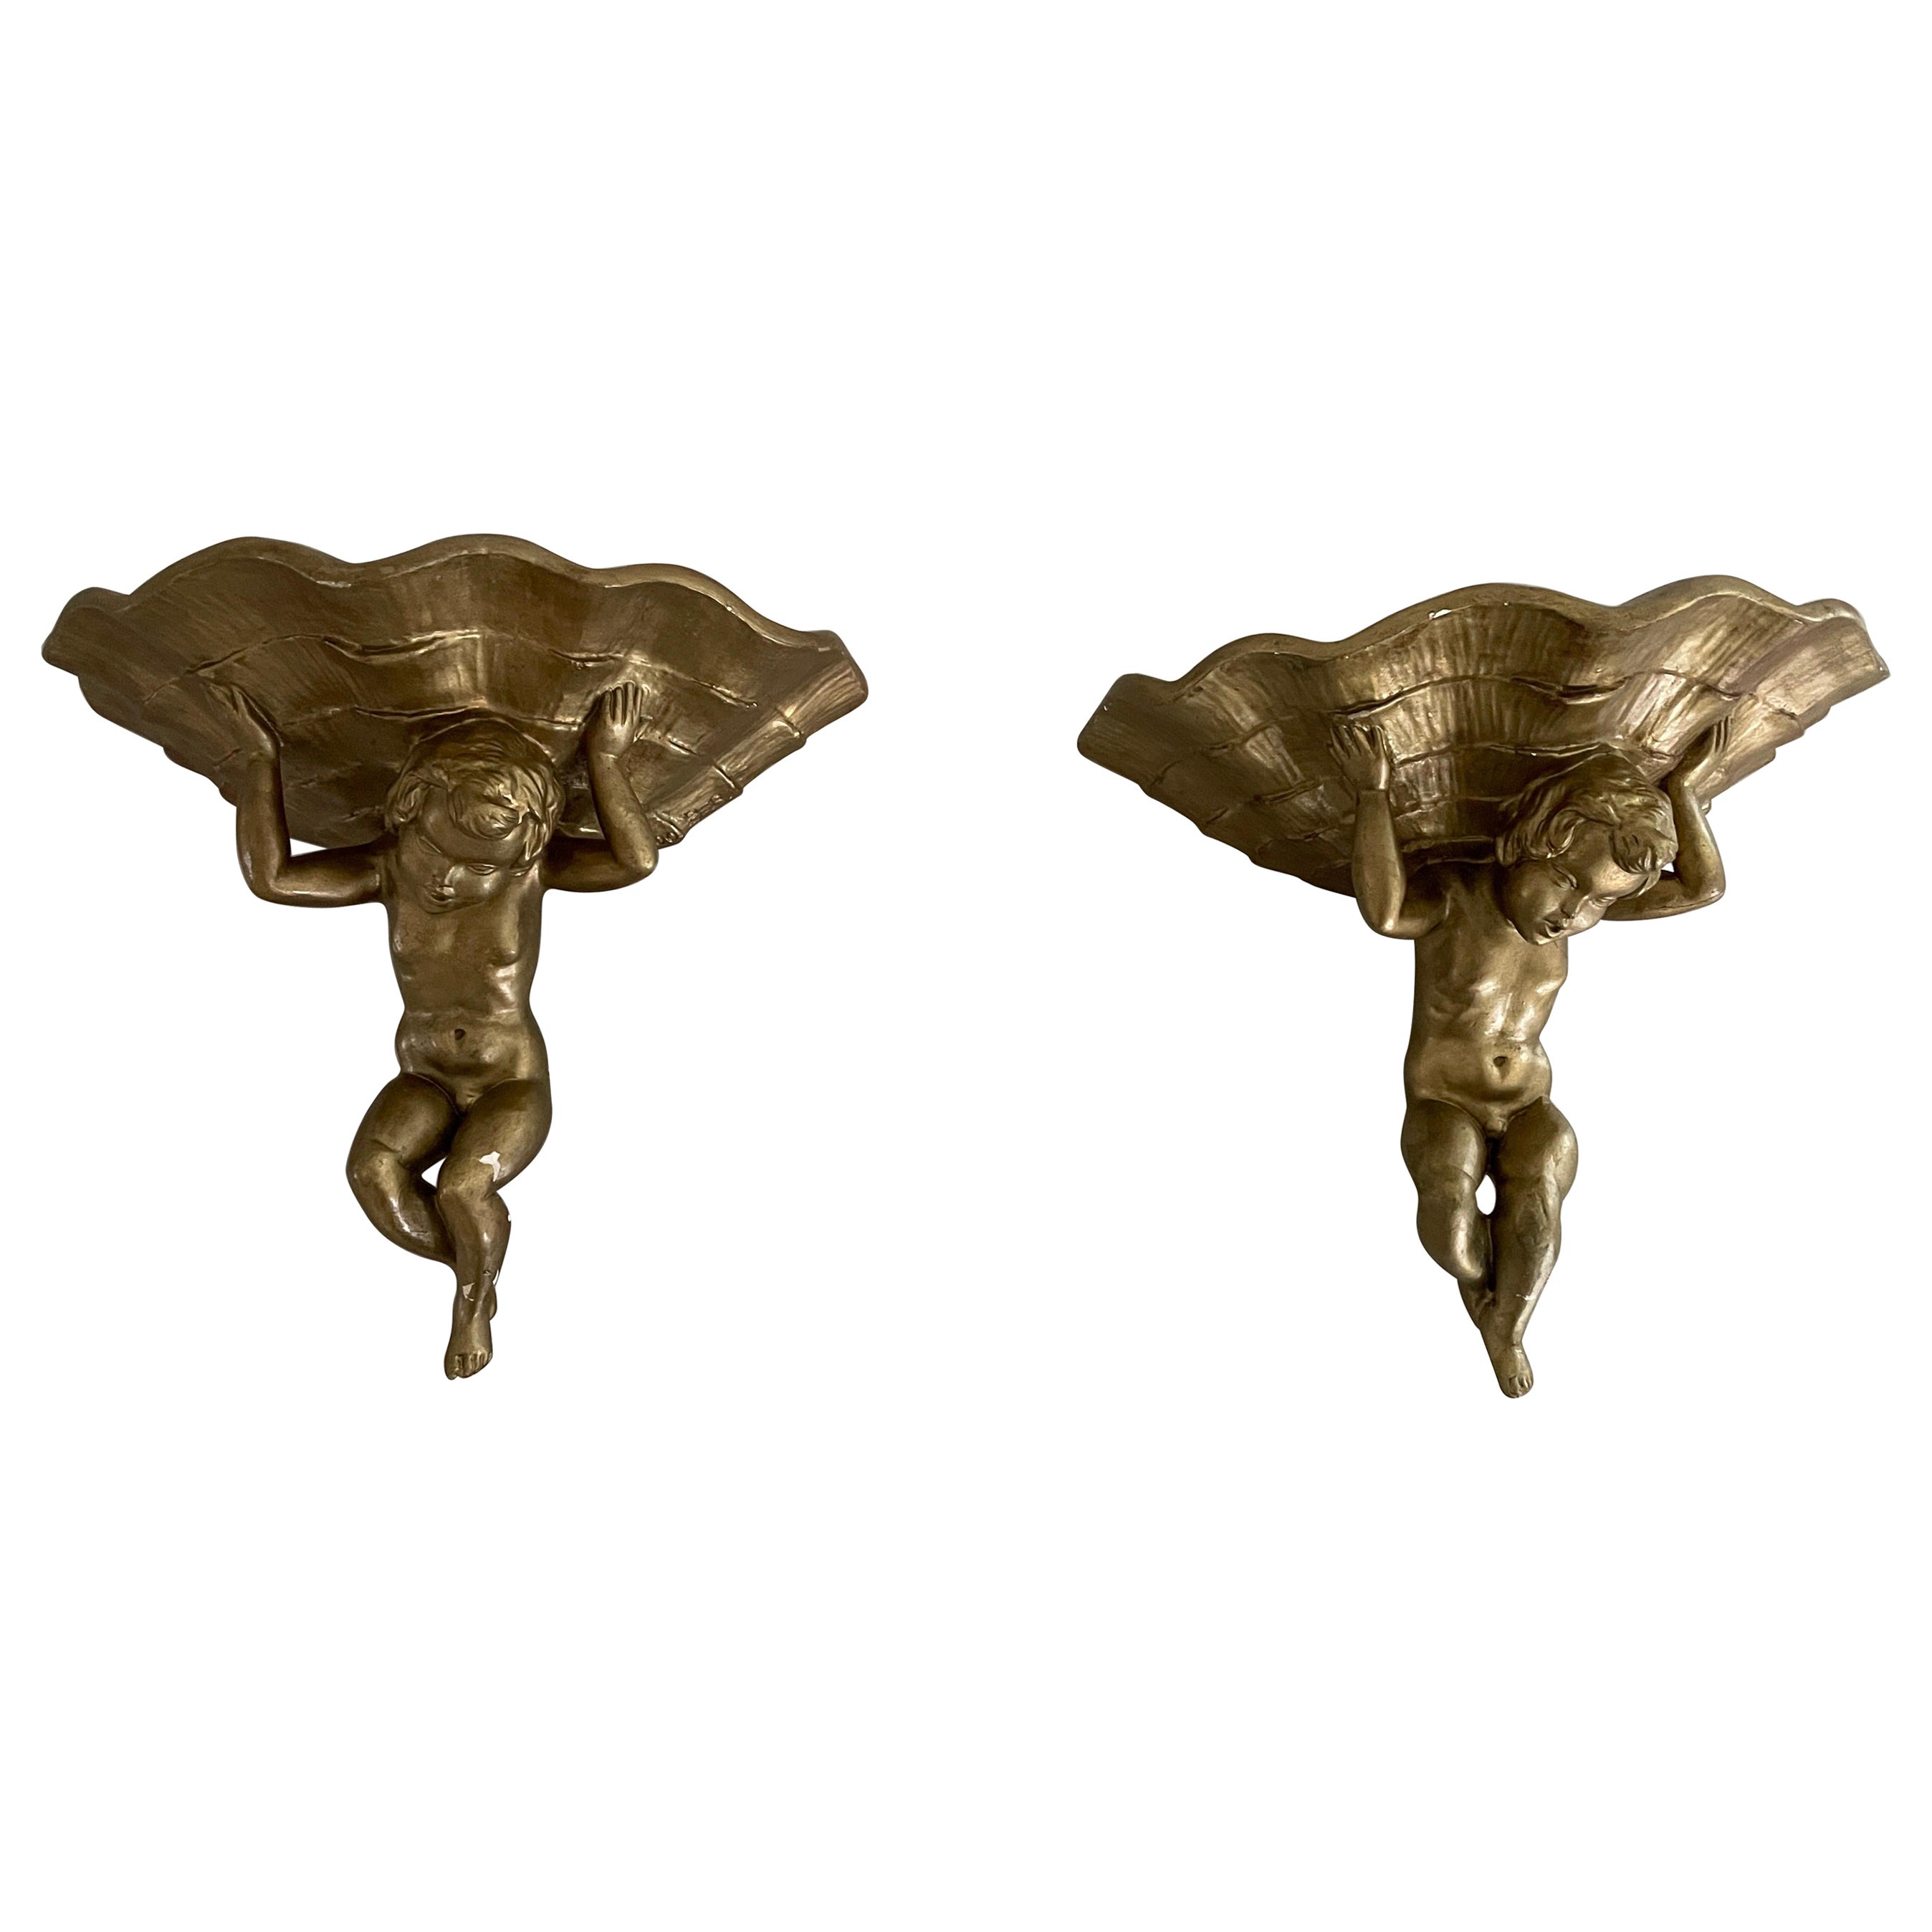 Made of Plaster Gold Coloured Pair of Sconces in Angel Sculpture, 1960s, Italy For Sale